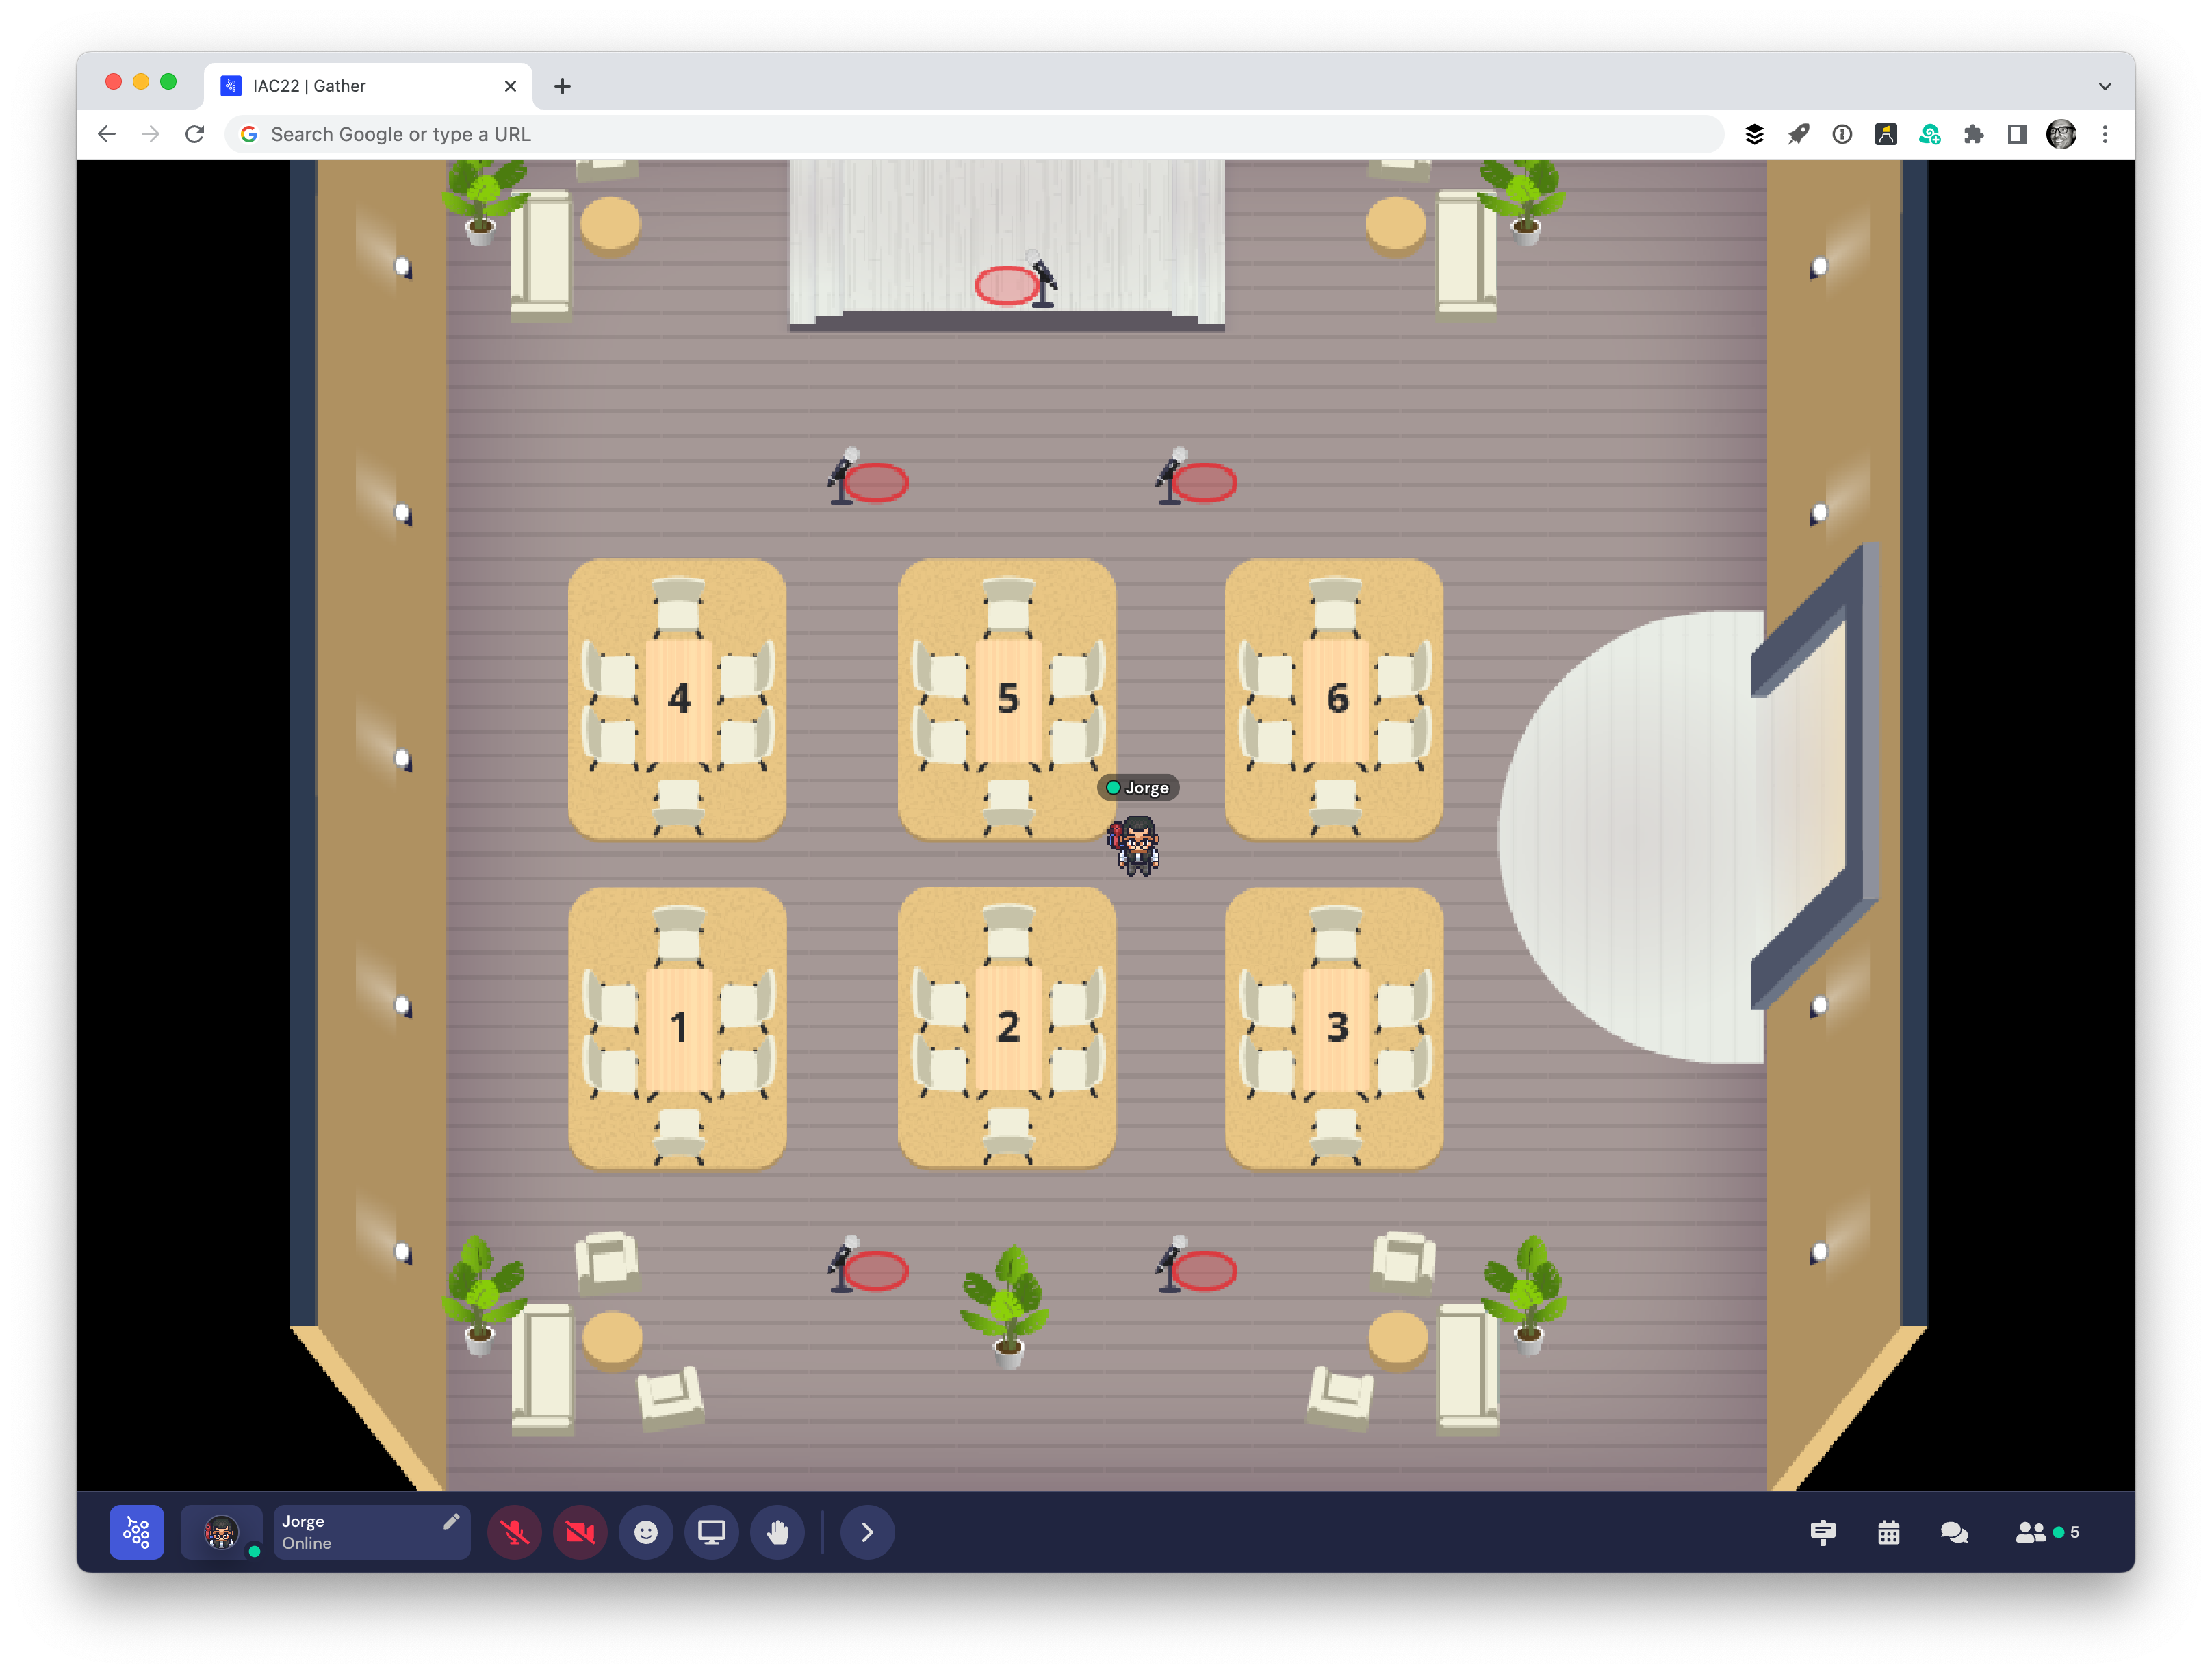 Screenshot of the Gather user interface, showing Jorge's avatar in the middle of an empty conference room.